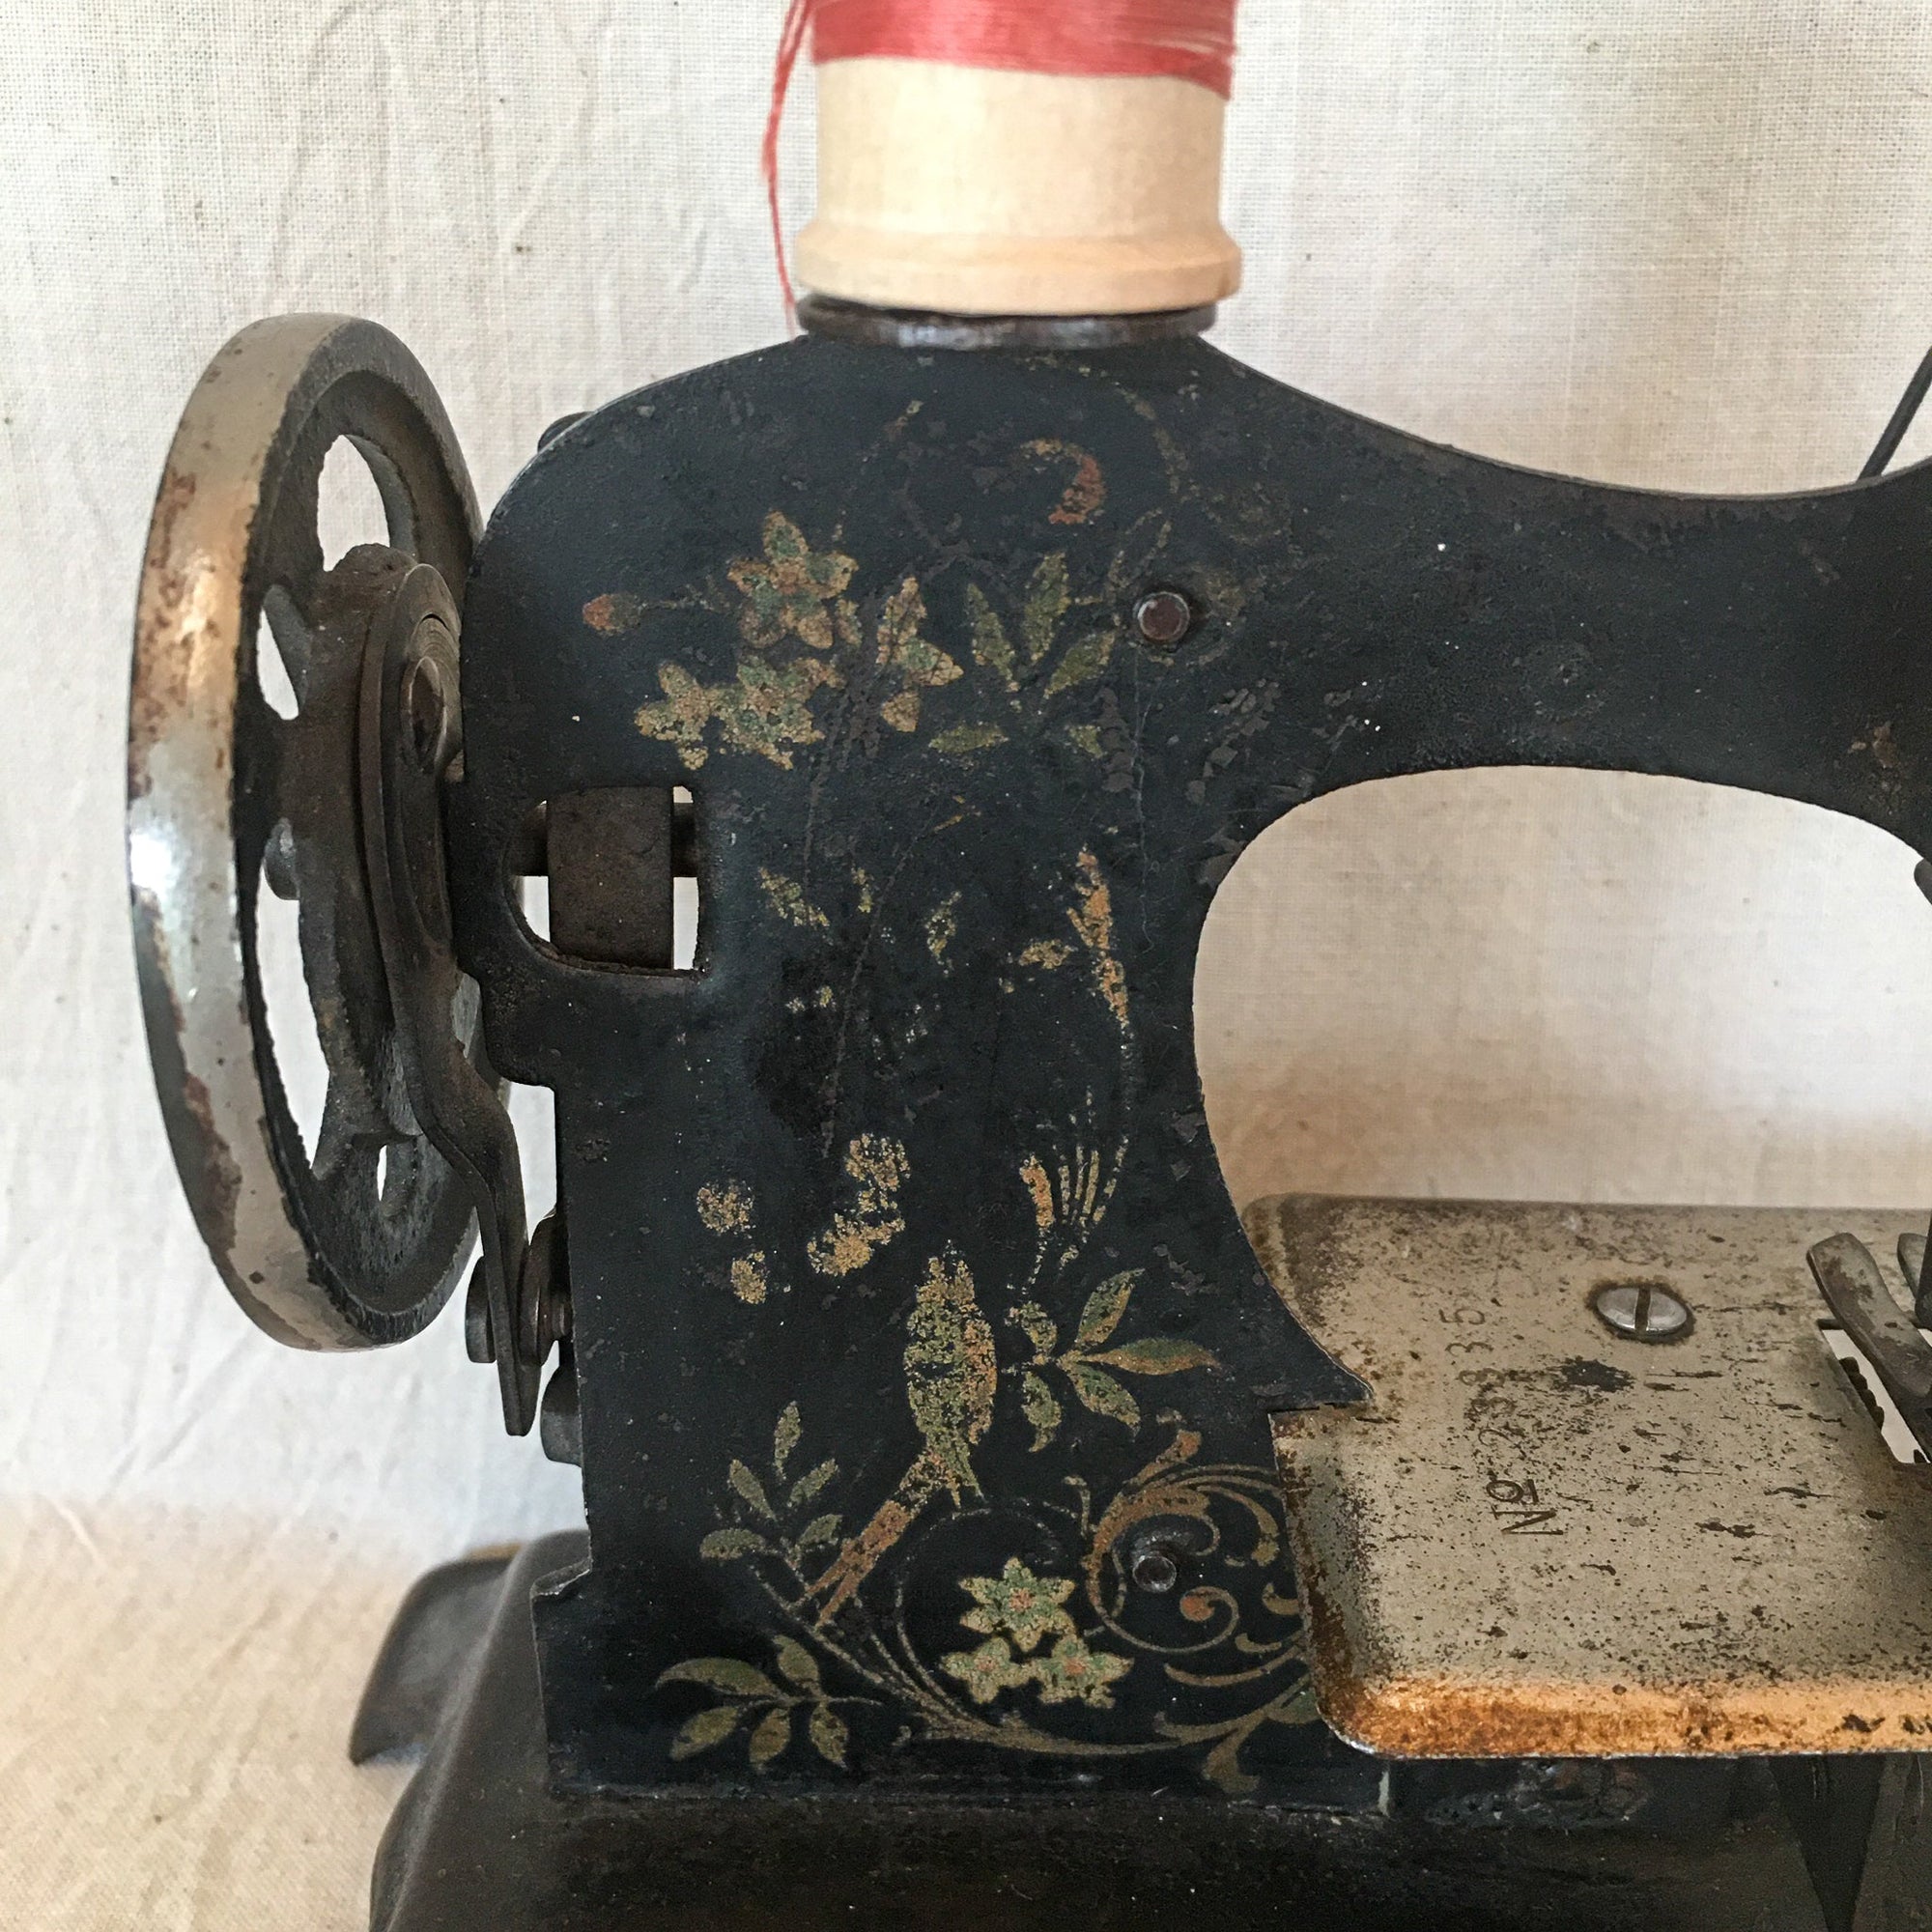 Early 1900’s Toy Sewing Machine